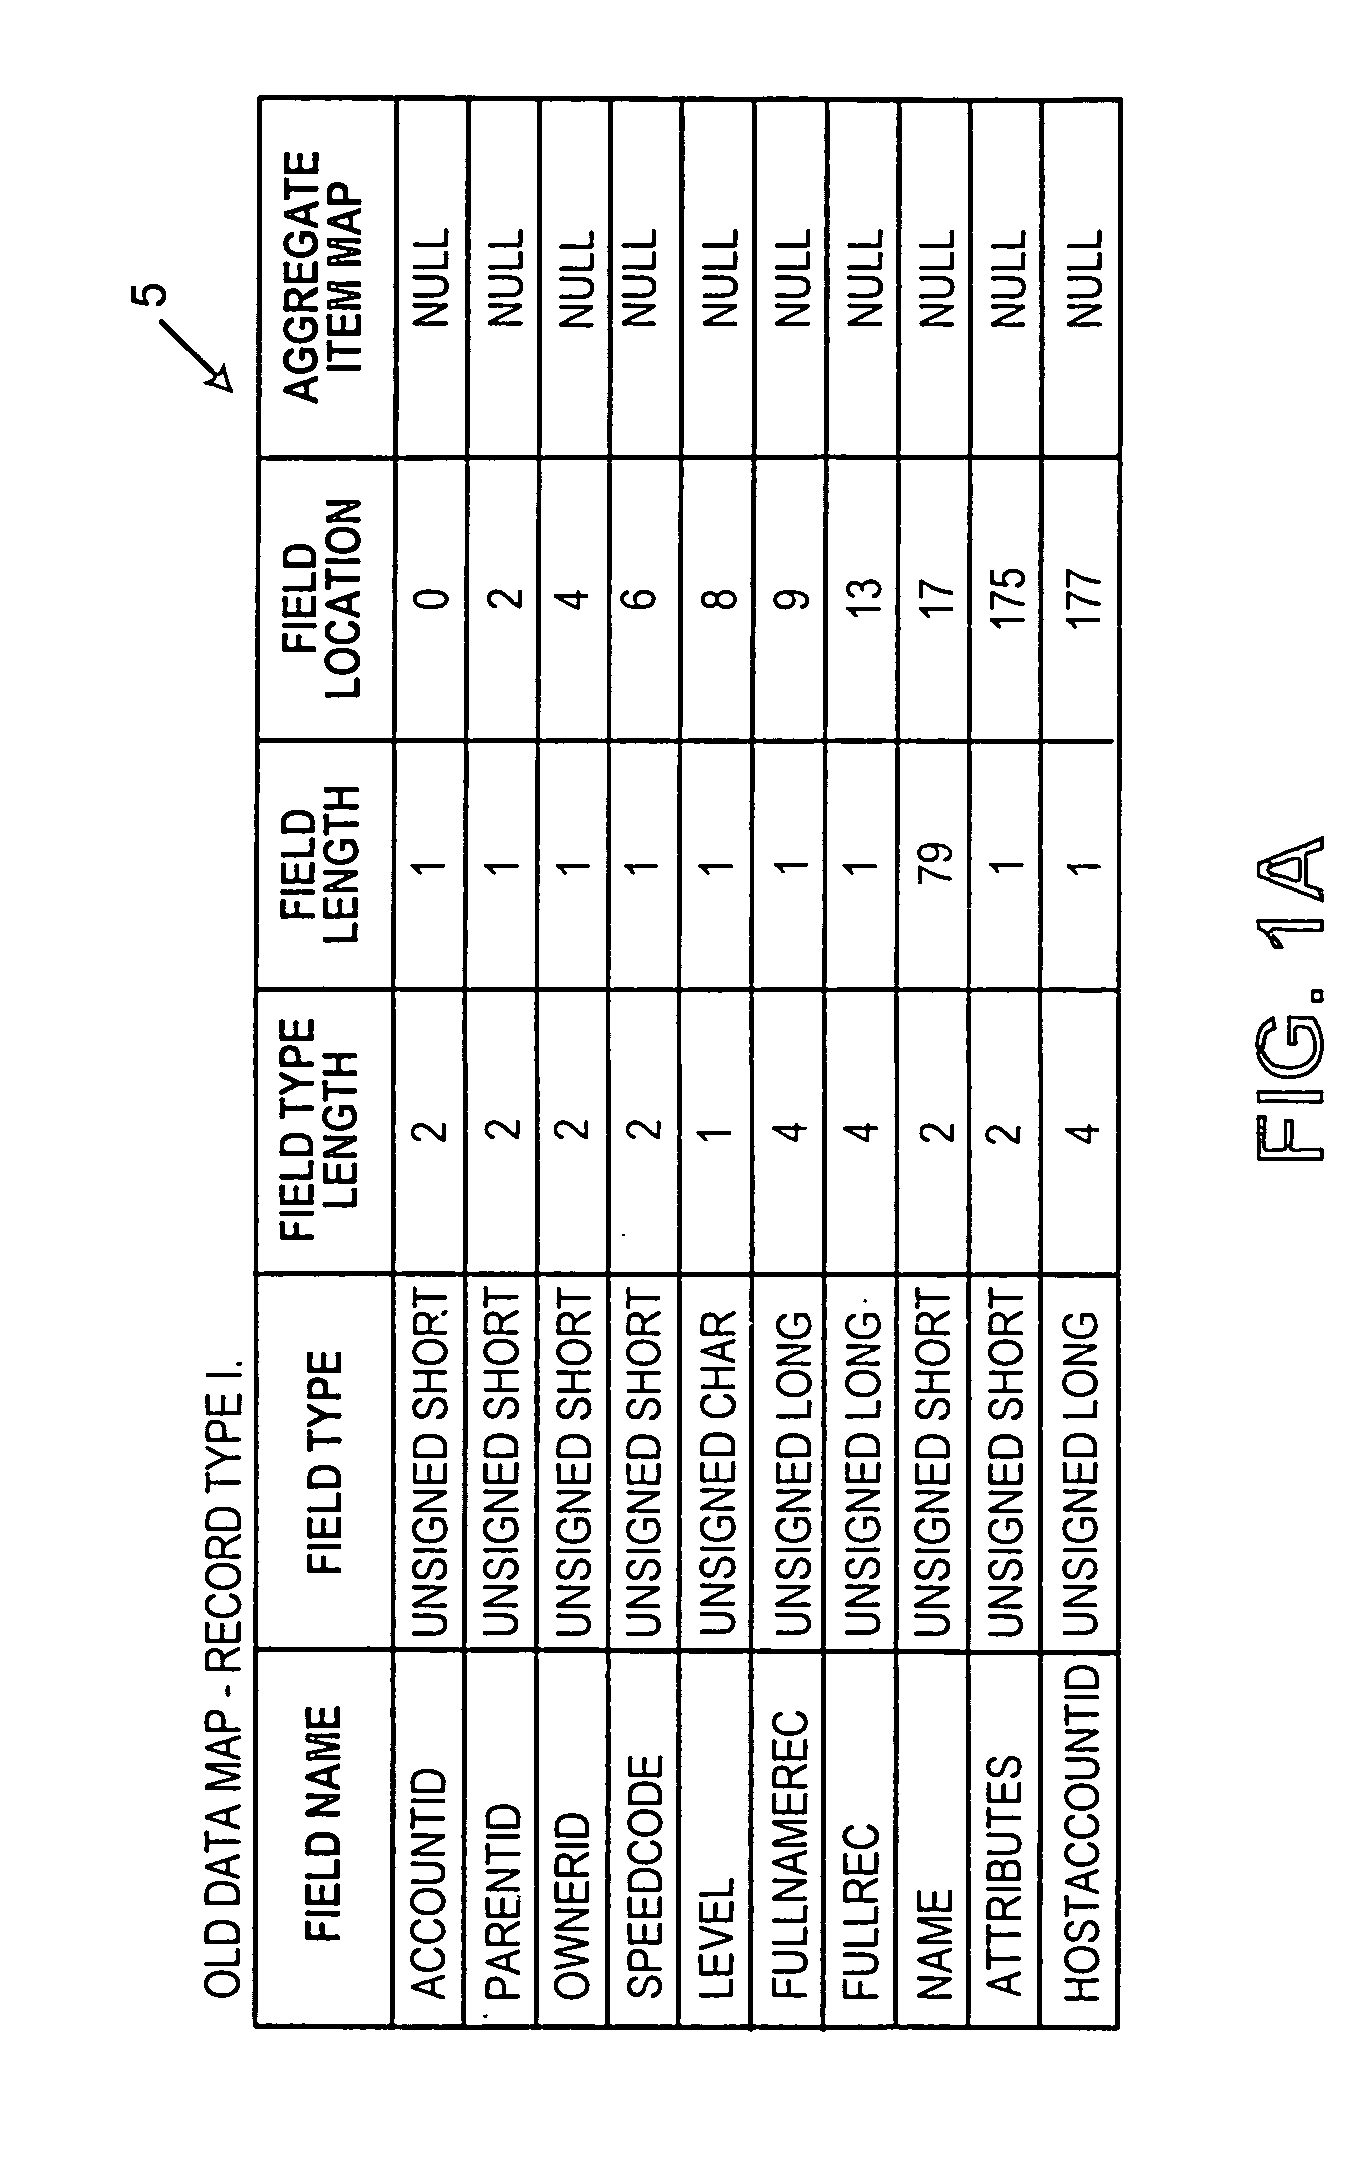 Method for updating and preserving data when performing a software upgrade